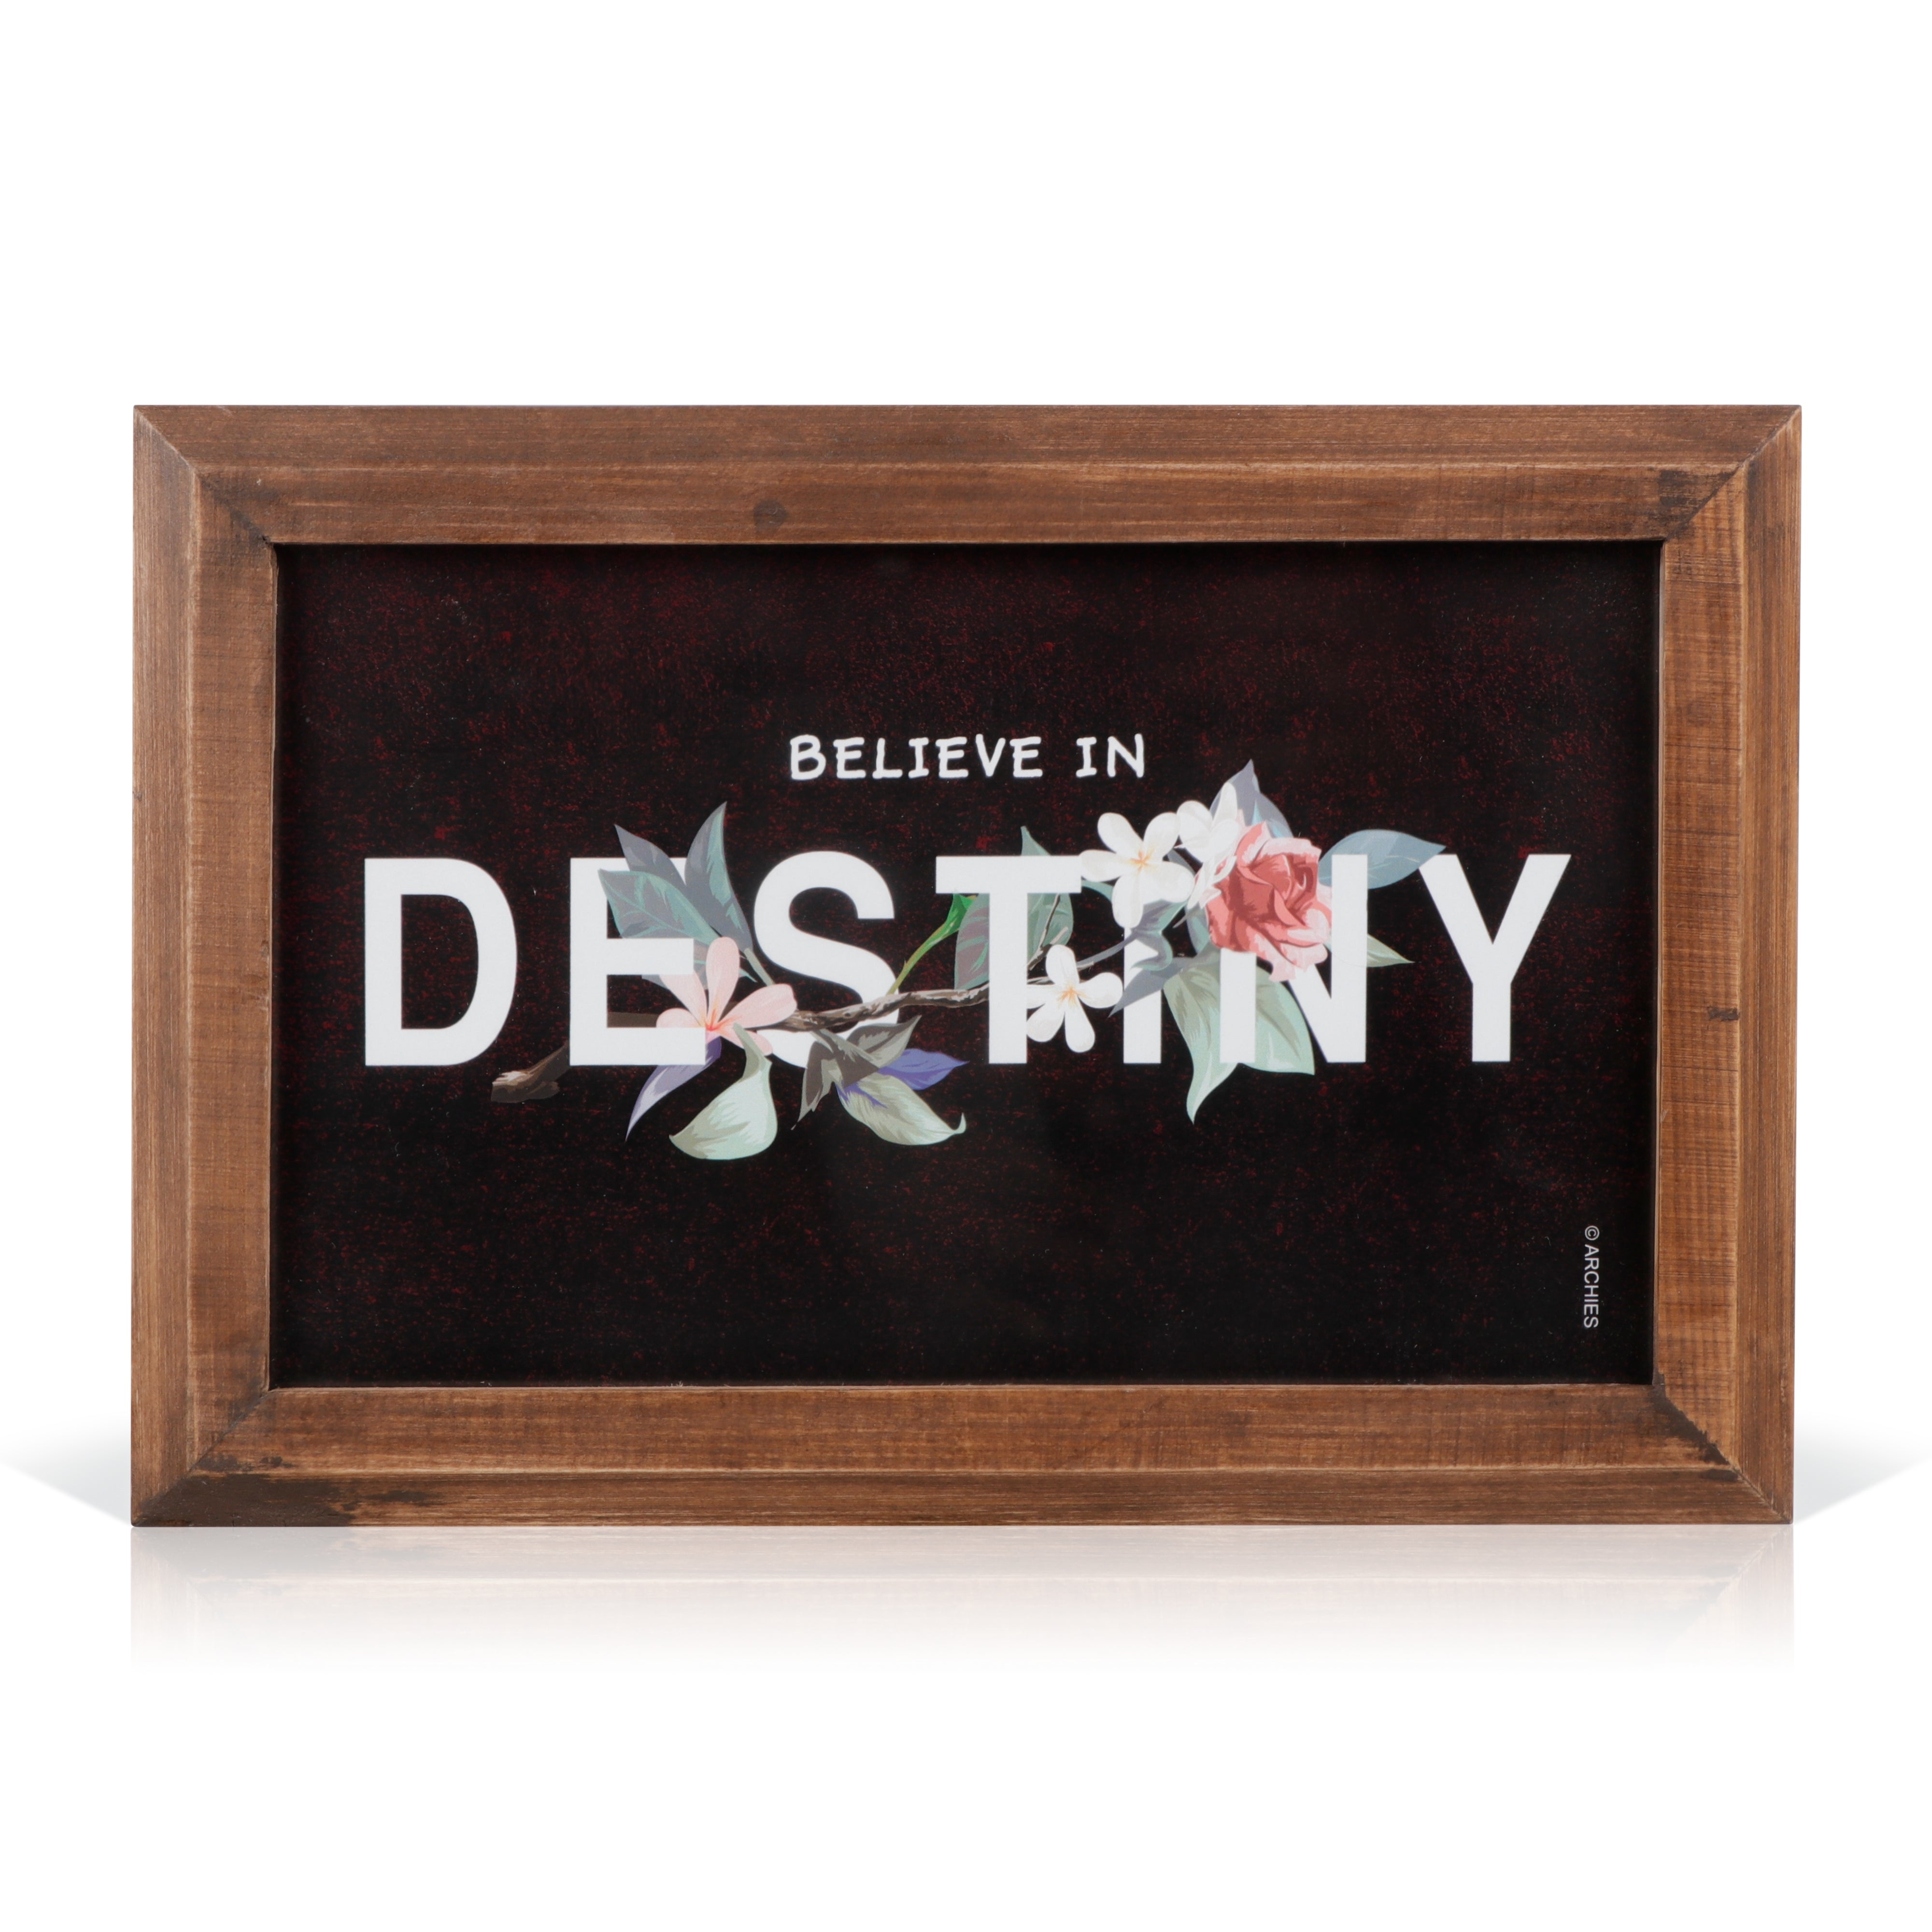 Archies KEEPSAKE QUOTATION- BELIVE IN DESTINY For gifting and Home décor